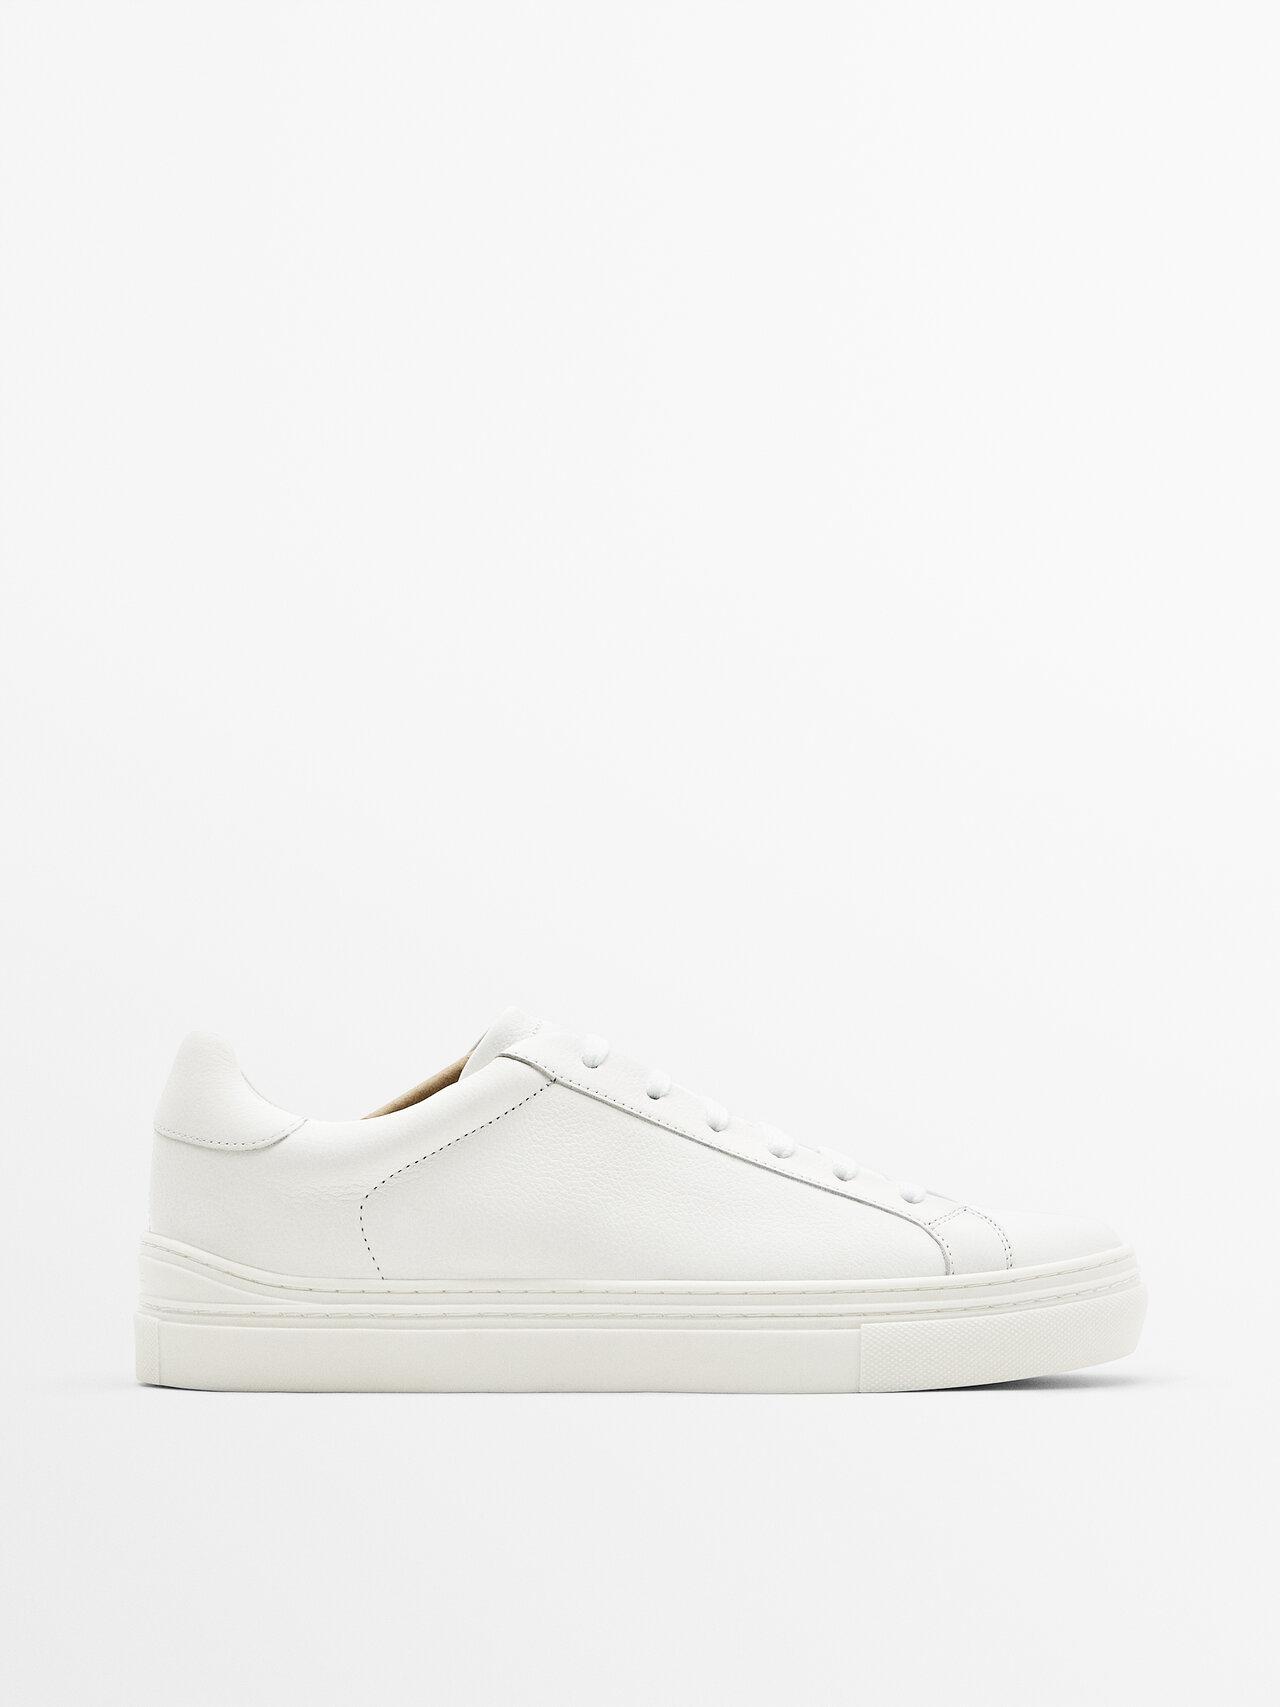 MASSIMO DUTTI Leather Trainers in White for Men | Lyst